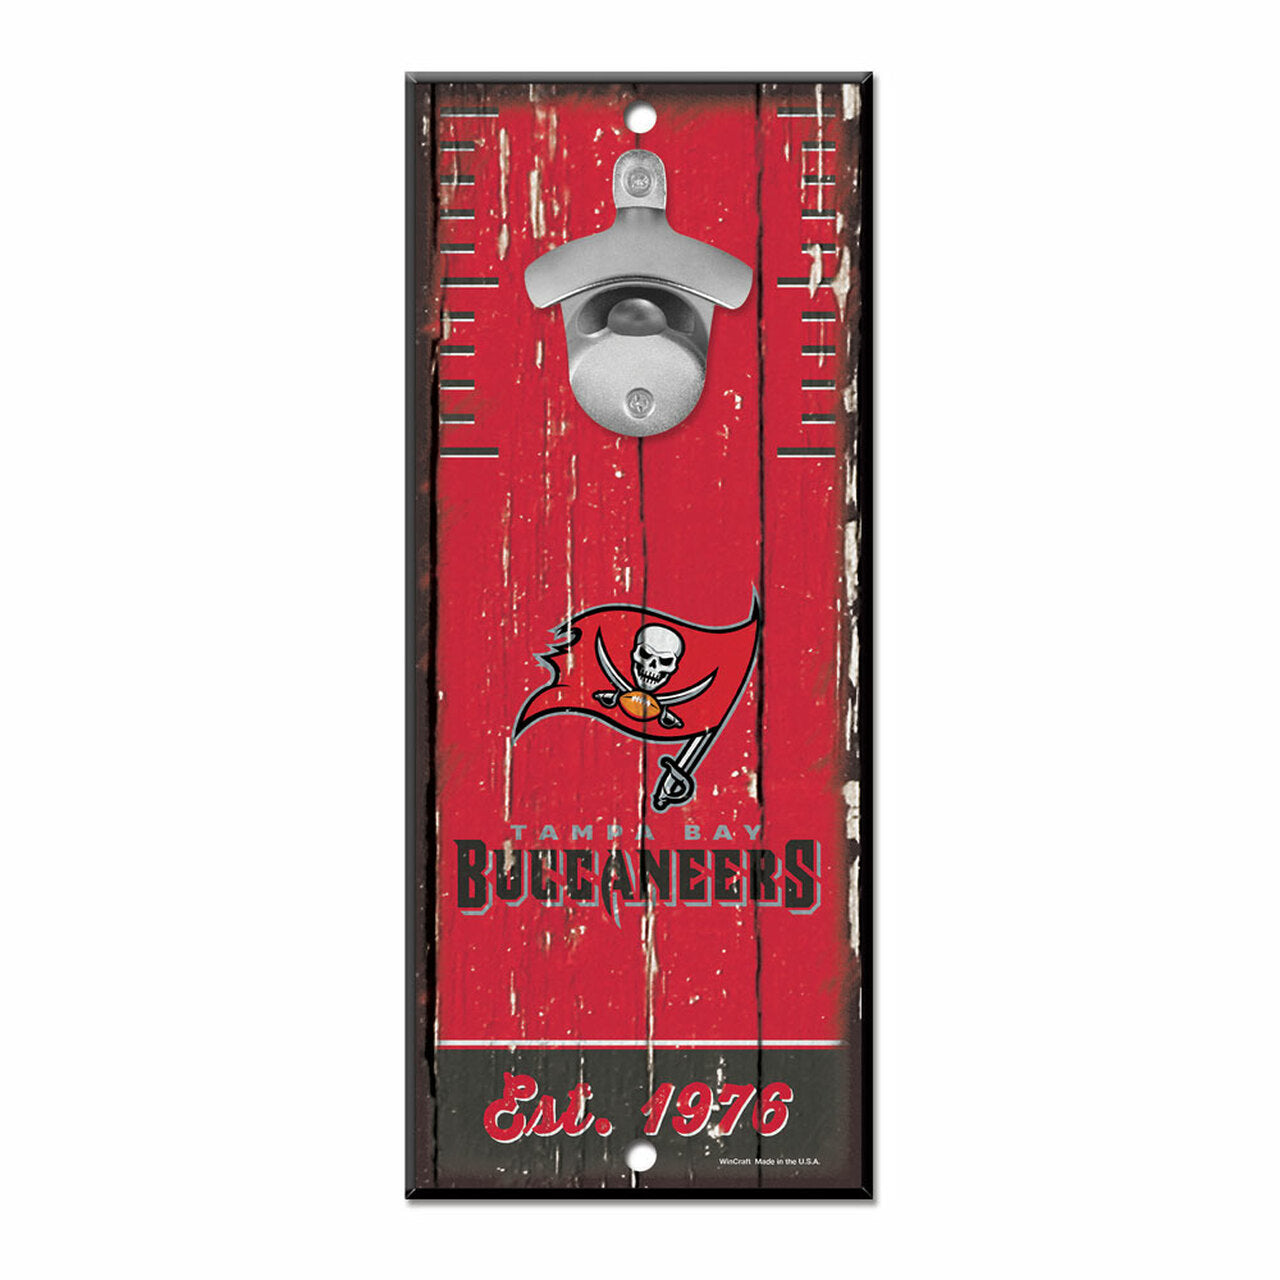 Tampa Bay Buccaneers 5" x 11" Bottle Opener Wood Sign by Wincraft